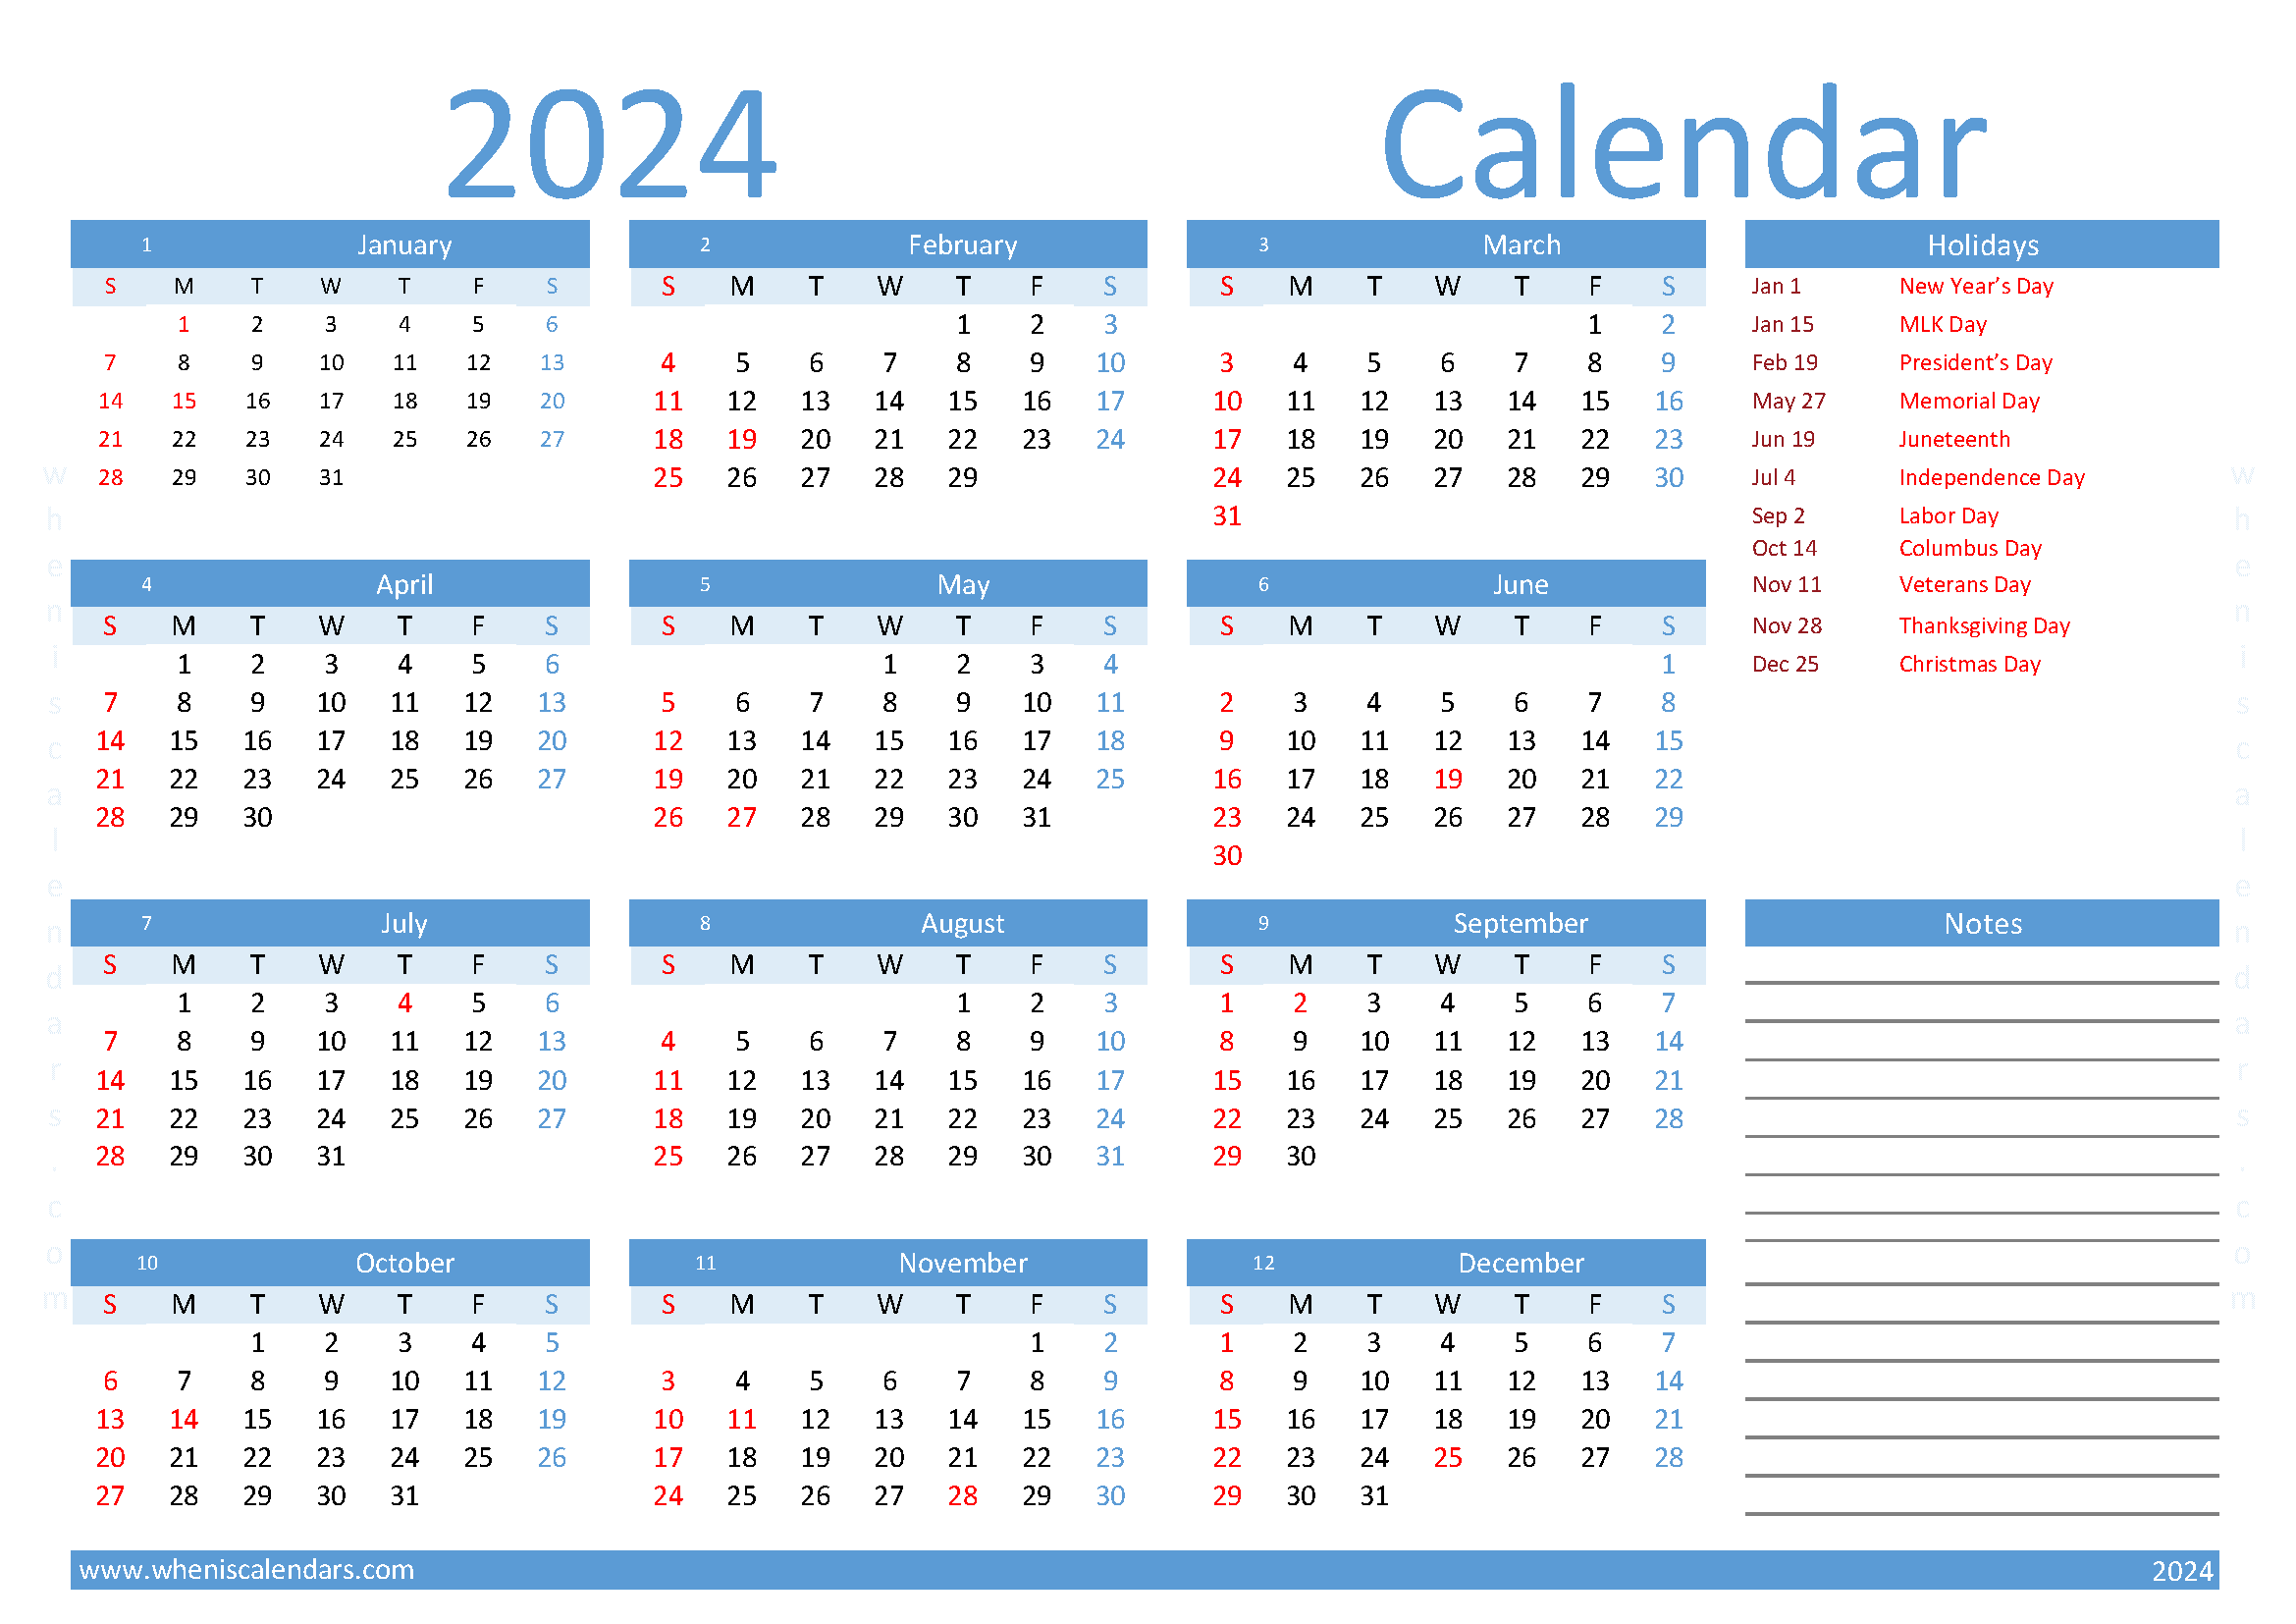 Download free printable 2024 Calendar with Holidays A4 in horizontal landscape